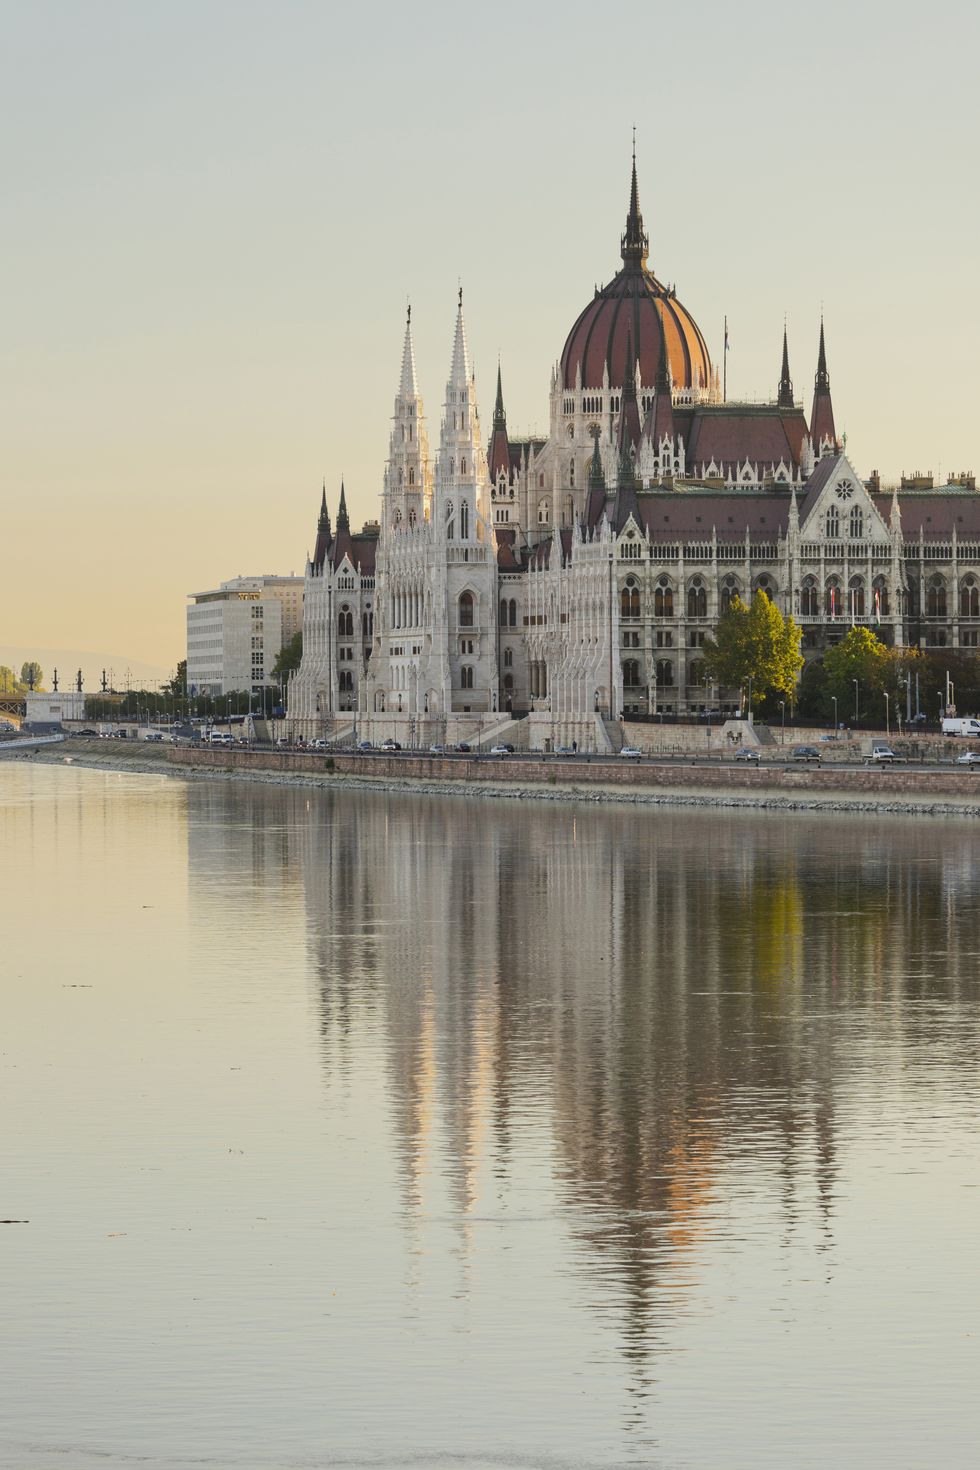 Reflection in the water, parliament in the evening, Lajos Kossuth Square, Danube, Danube, Budapest, Hungary